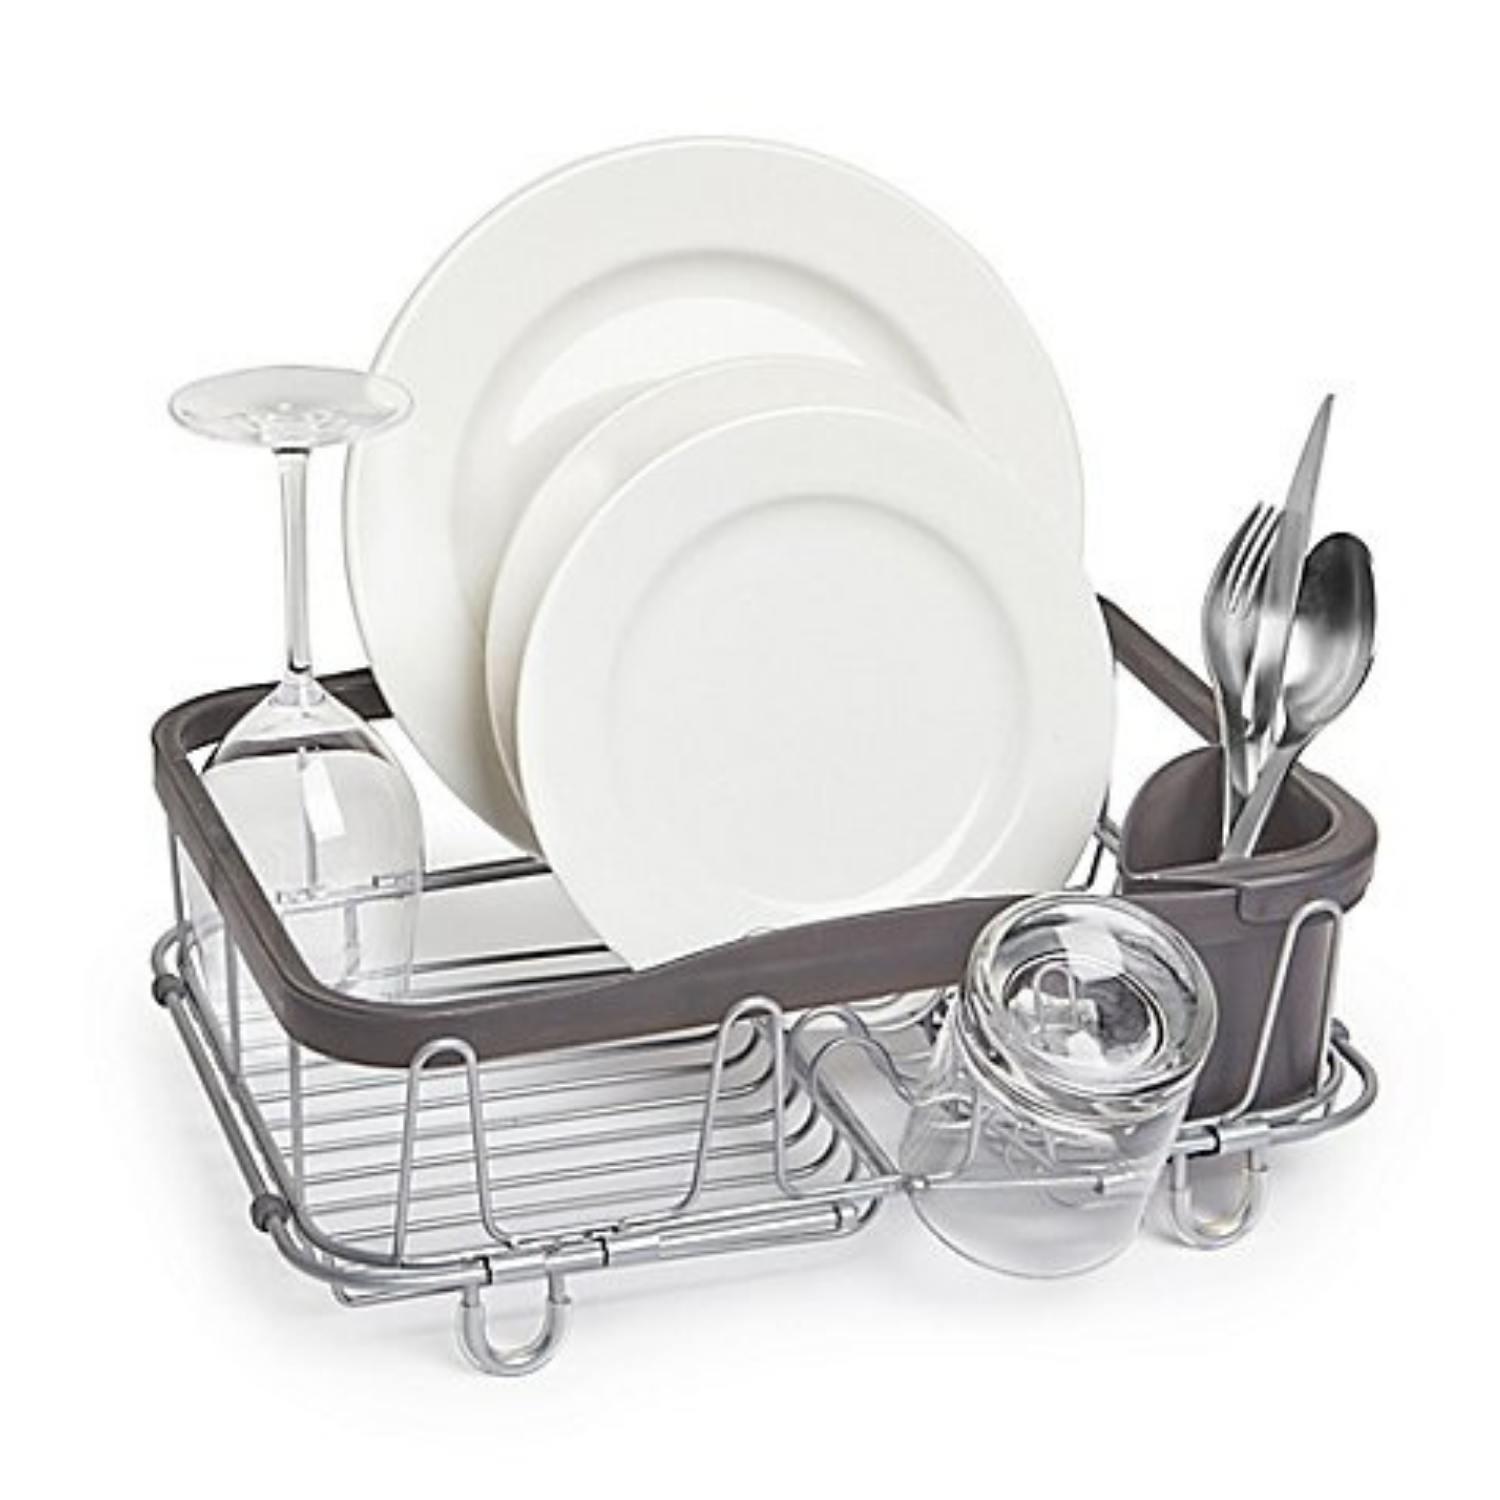 Sink-in Multi-Use Dish Rack by Umbra